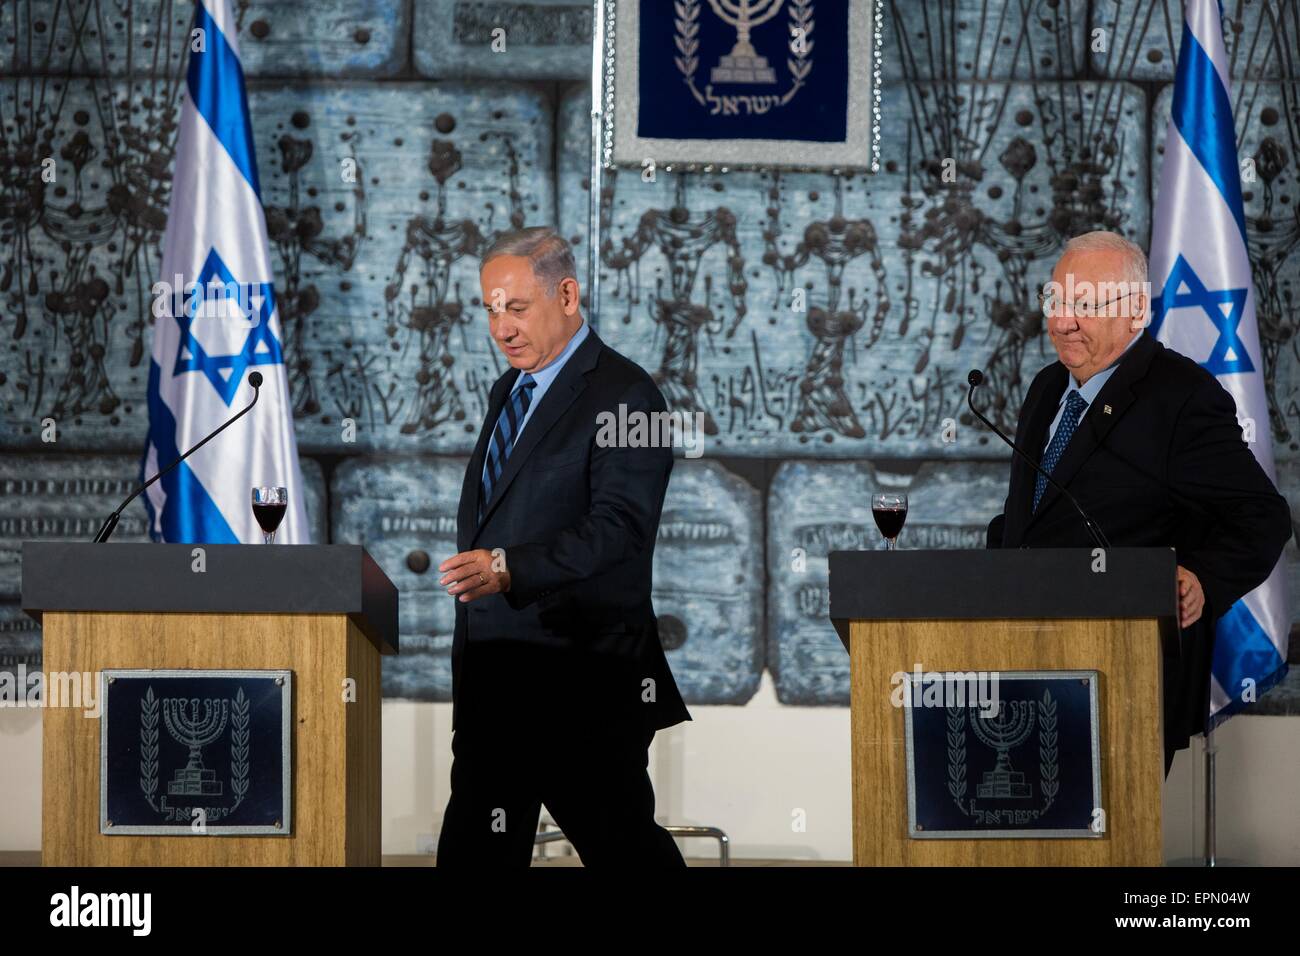 Jerusalem. 19th May, 2015. Israeli President Reuven Rivlin (R) and Prime Minister Benjamin Netanyahu attend a photocall of the new Israeli government at the President's Residence in Jerusalem, on May 19, 2015. © JINI/Xinhua/Alamy Live News Stock Photo